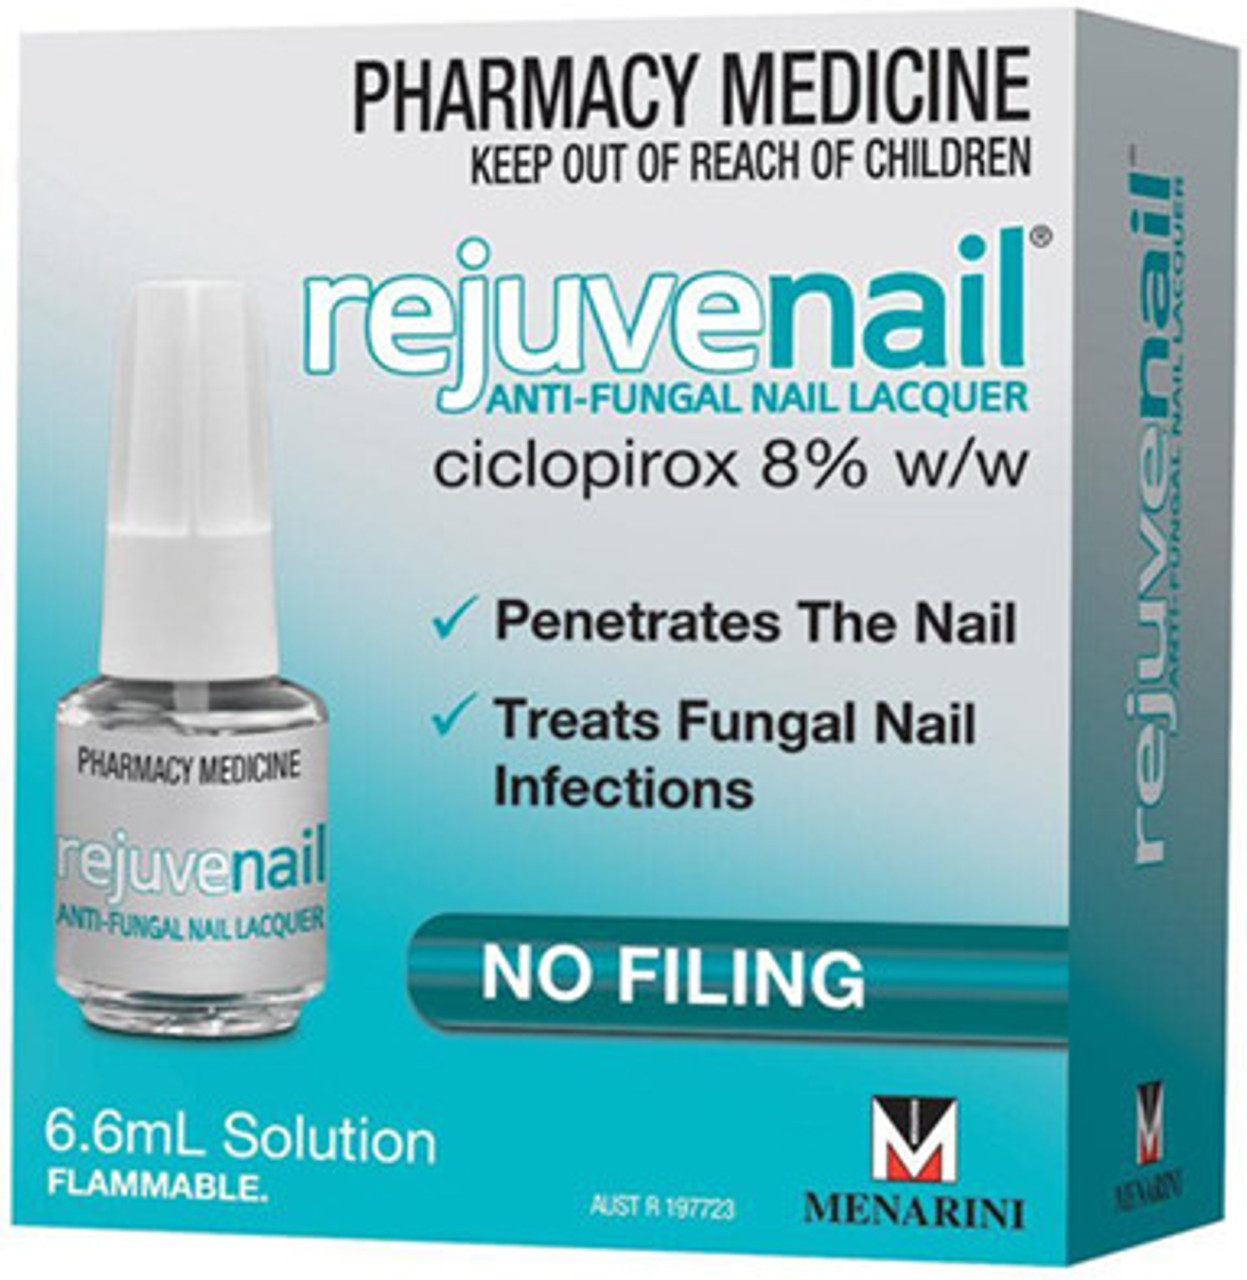 What You Should Know about Toenail Fungus Medication